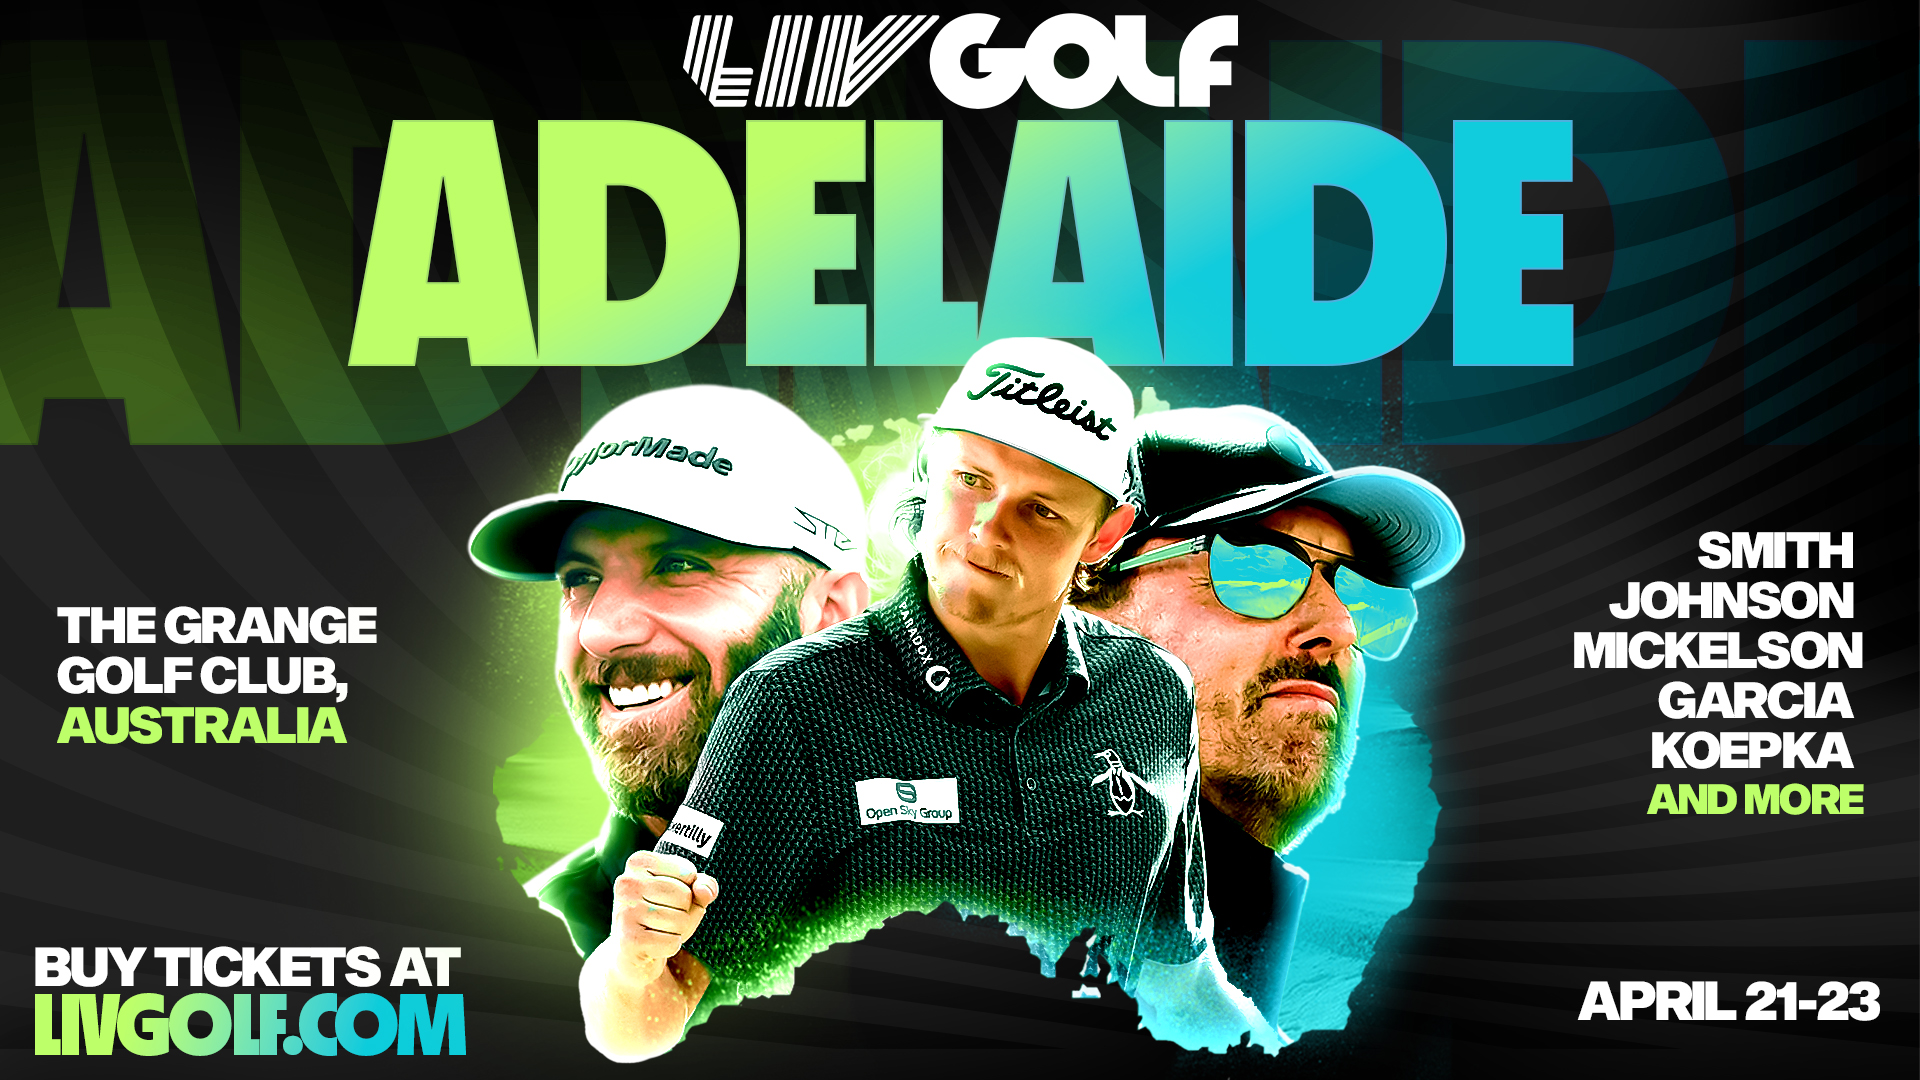 LIV Golf Adelaide releases additional tickets for highly anticipa...